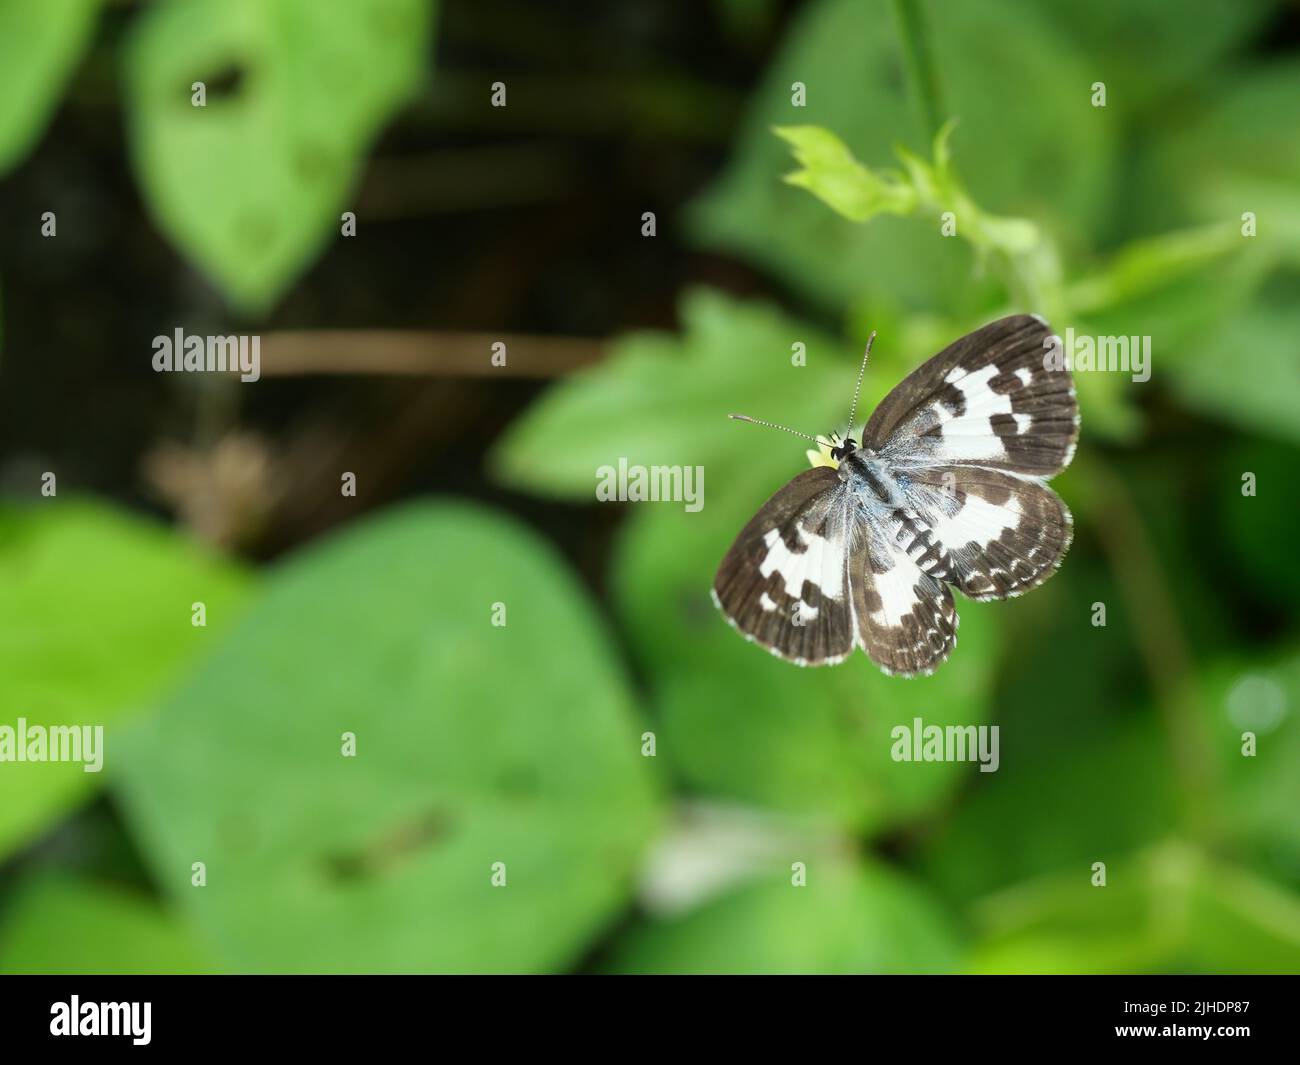 Common Pierrot butterfly with natural green background , Stripes and brown spots on white wings of insect, Thailand Stock Photo